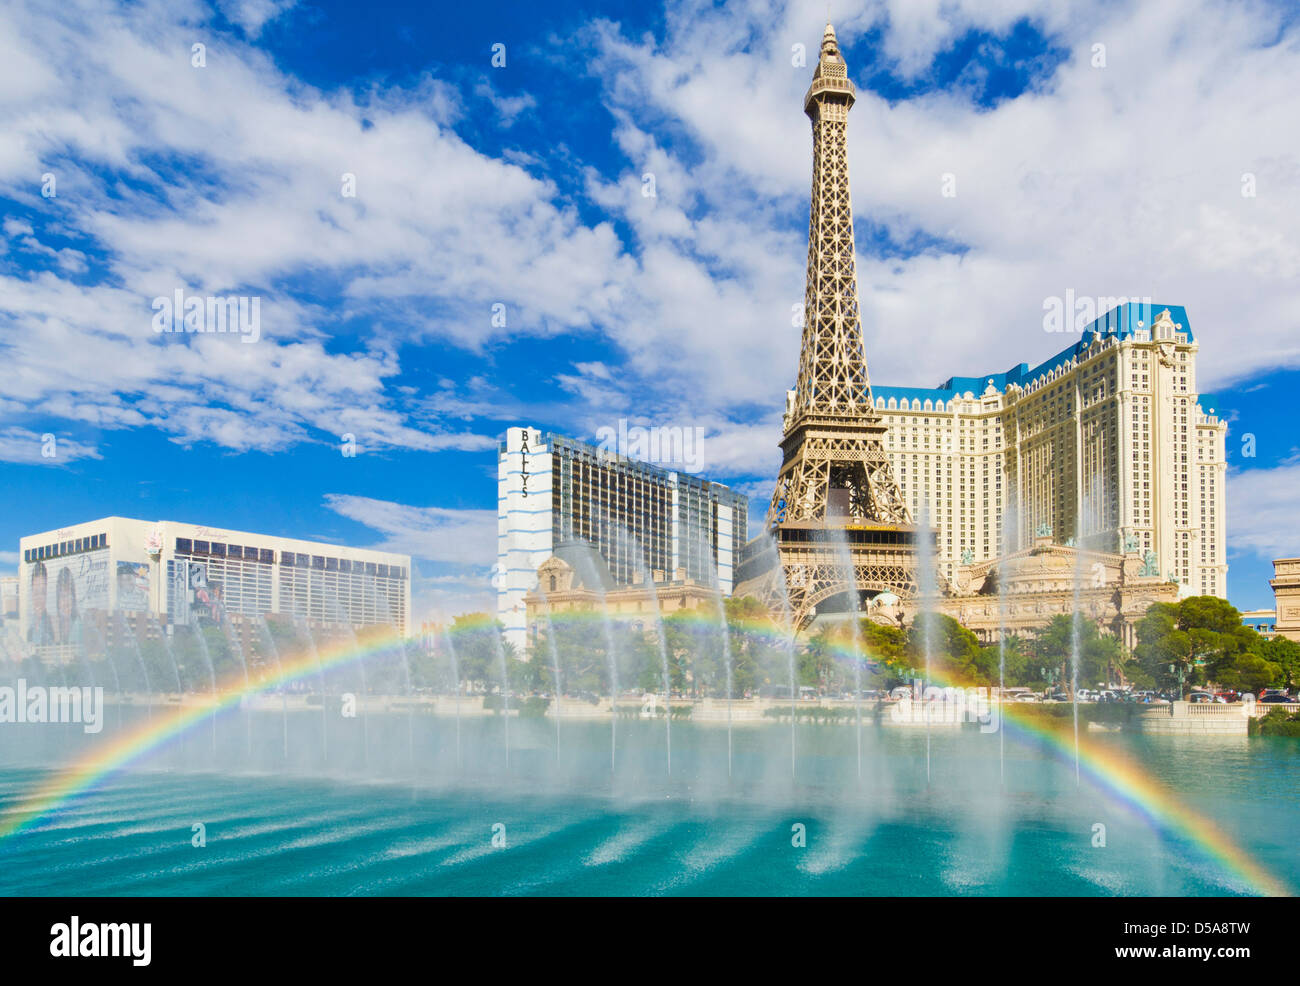 Water fountains and rainbow outside the Bellagio hotel with Paris hotel behind, The Strip, Las Vegas Boulevard South, Las Vegas Stock Photo